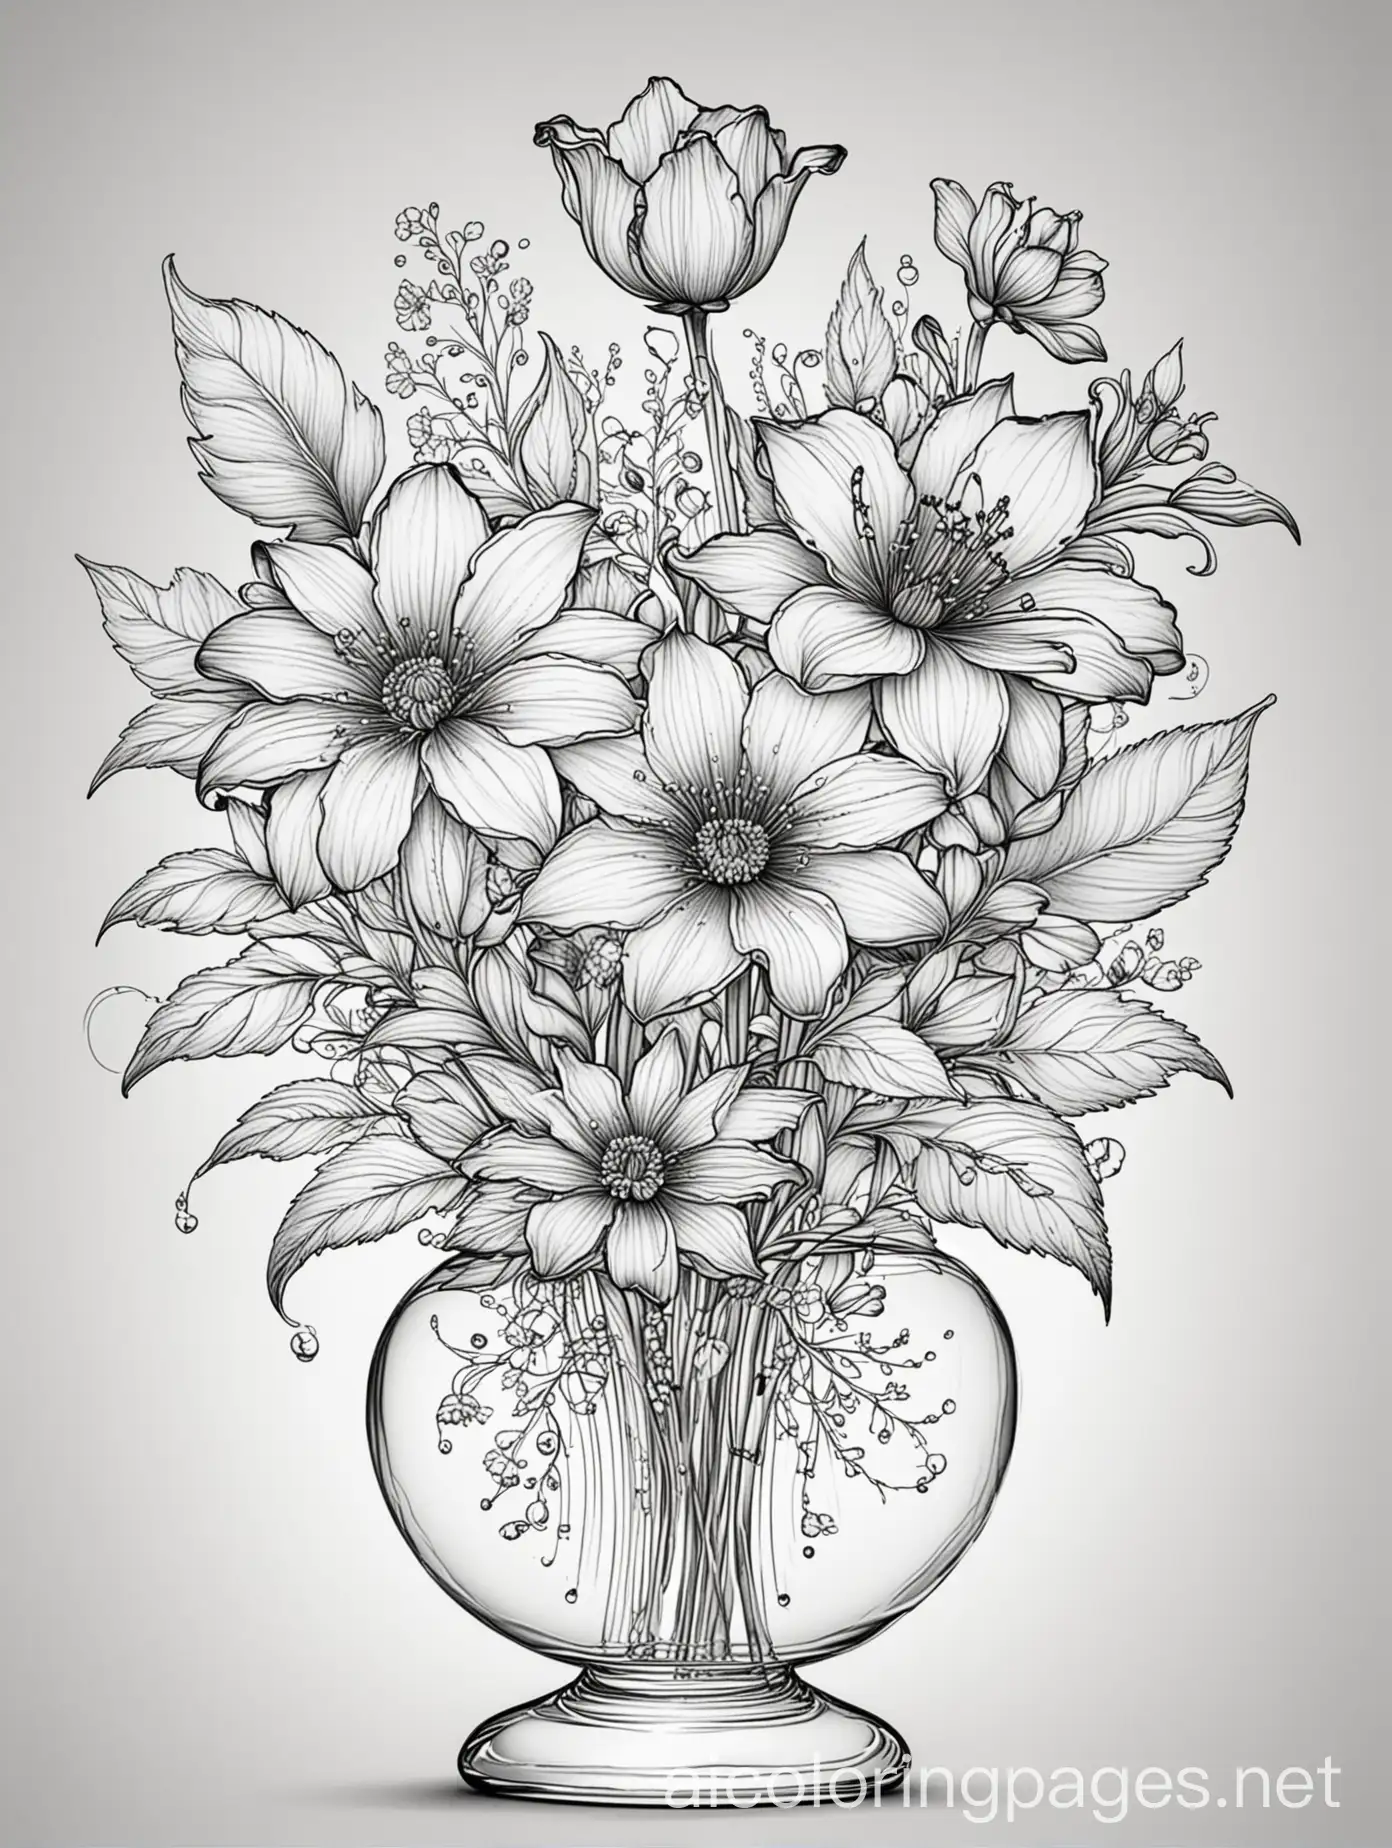 fantasy flowers in style of Paulina Góra, extremely detailed, fantasy, beautiful, glass vase, Coloring Page, black and white, line art, white background, Simplicity, Ample White Space. The background of the coloring page is plain white to make it easy for young children to color within the lines. The outlines of all the subjects are easy to distinguish, making it simple for kids to color without too much difficulty